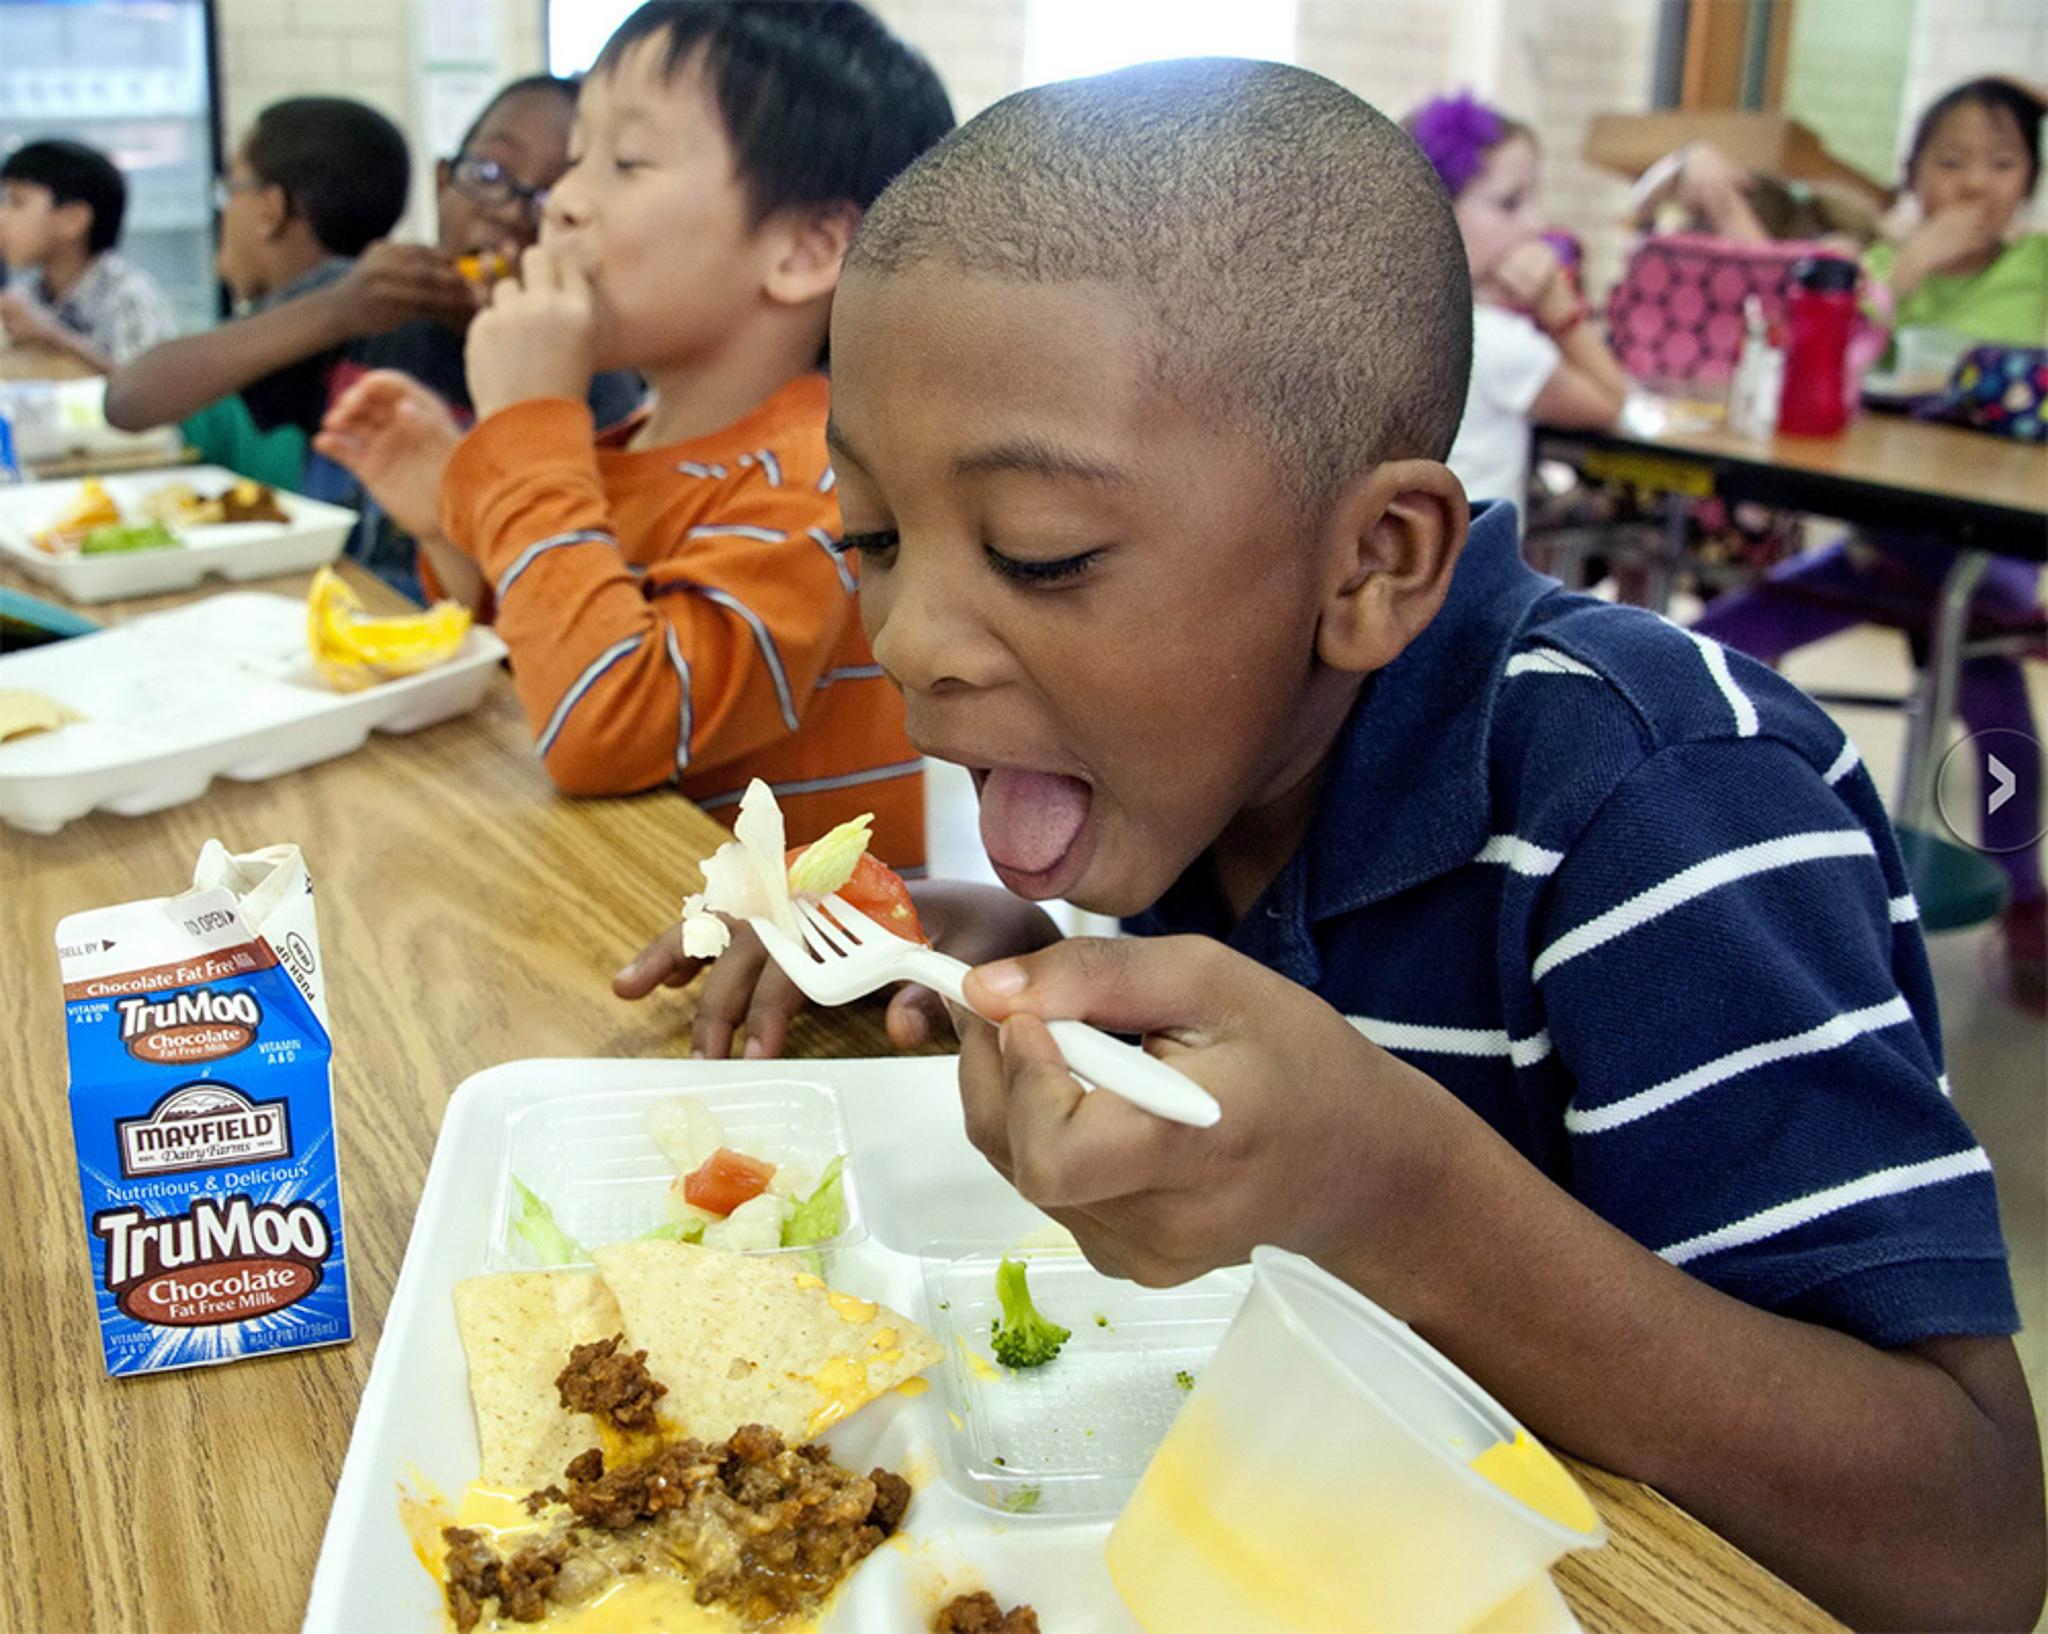 Kids eat lunch in a cafeteria